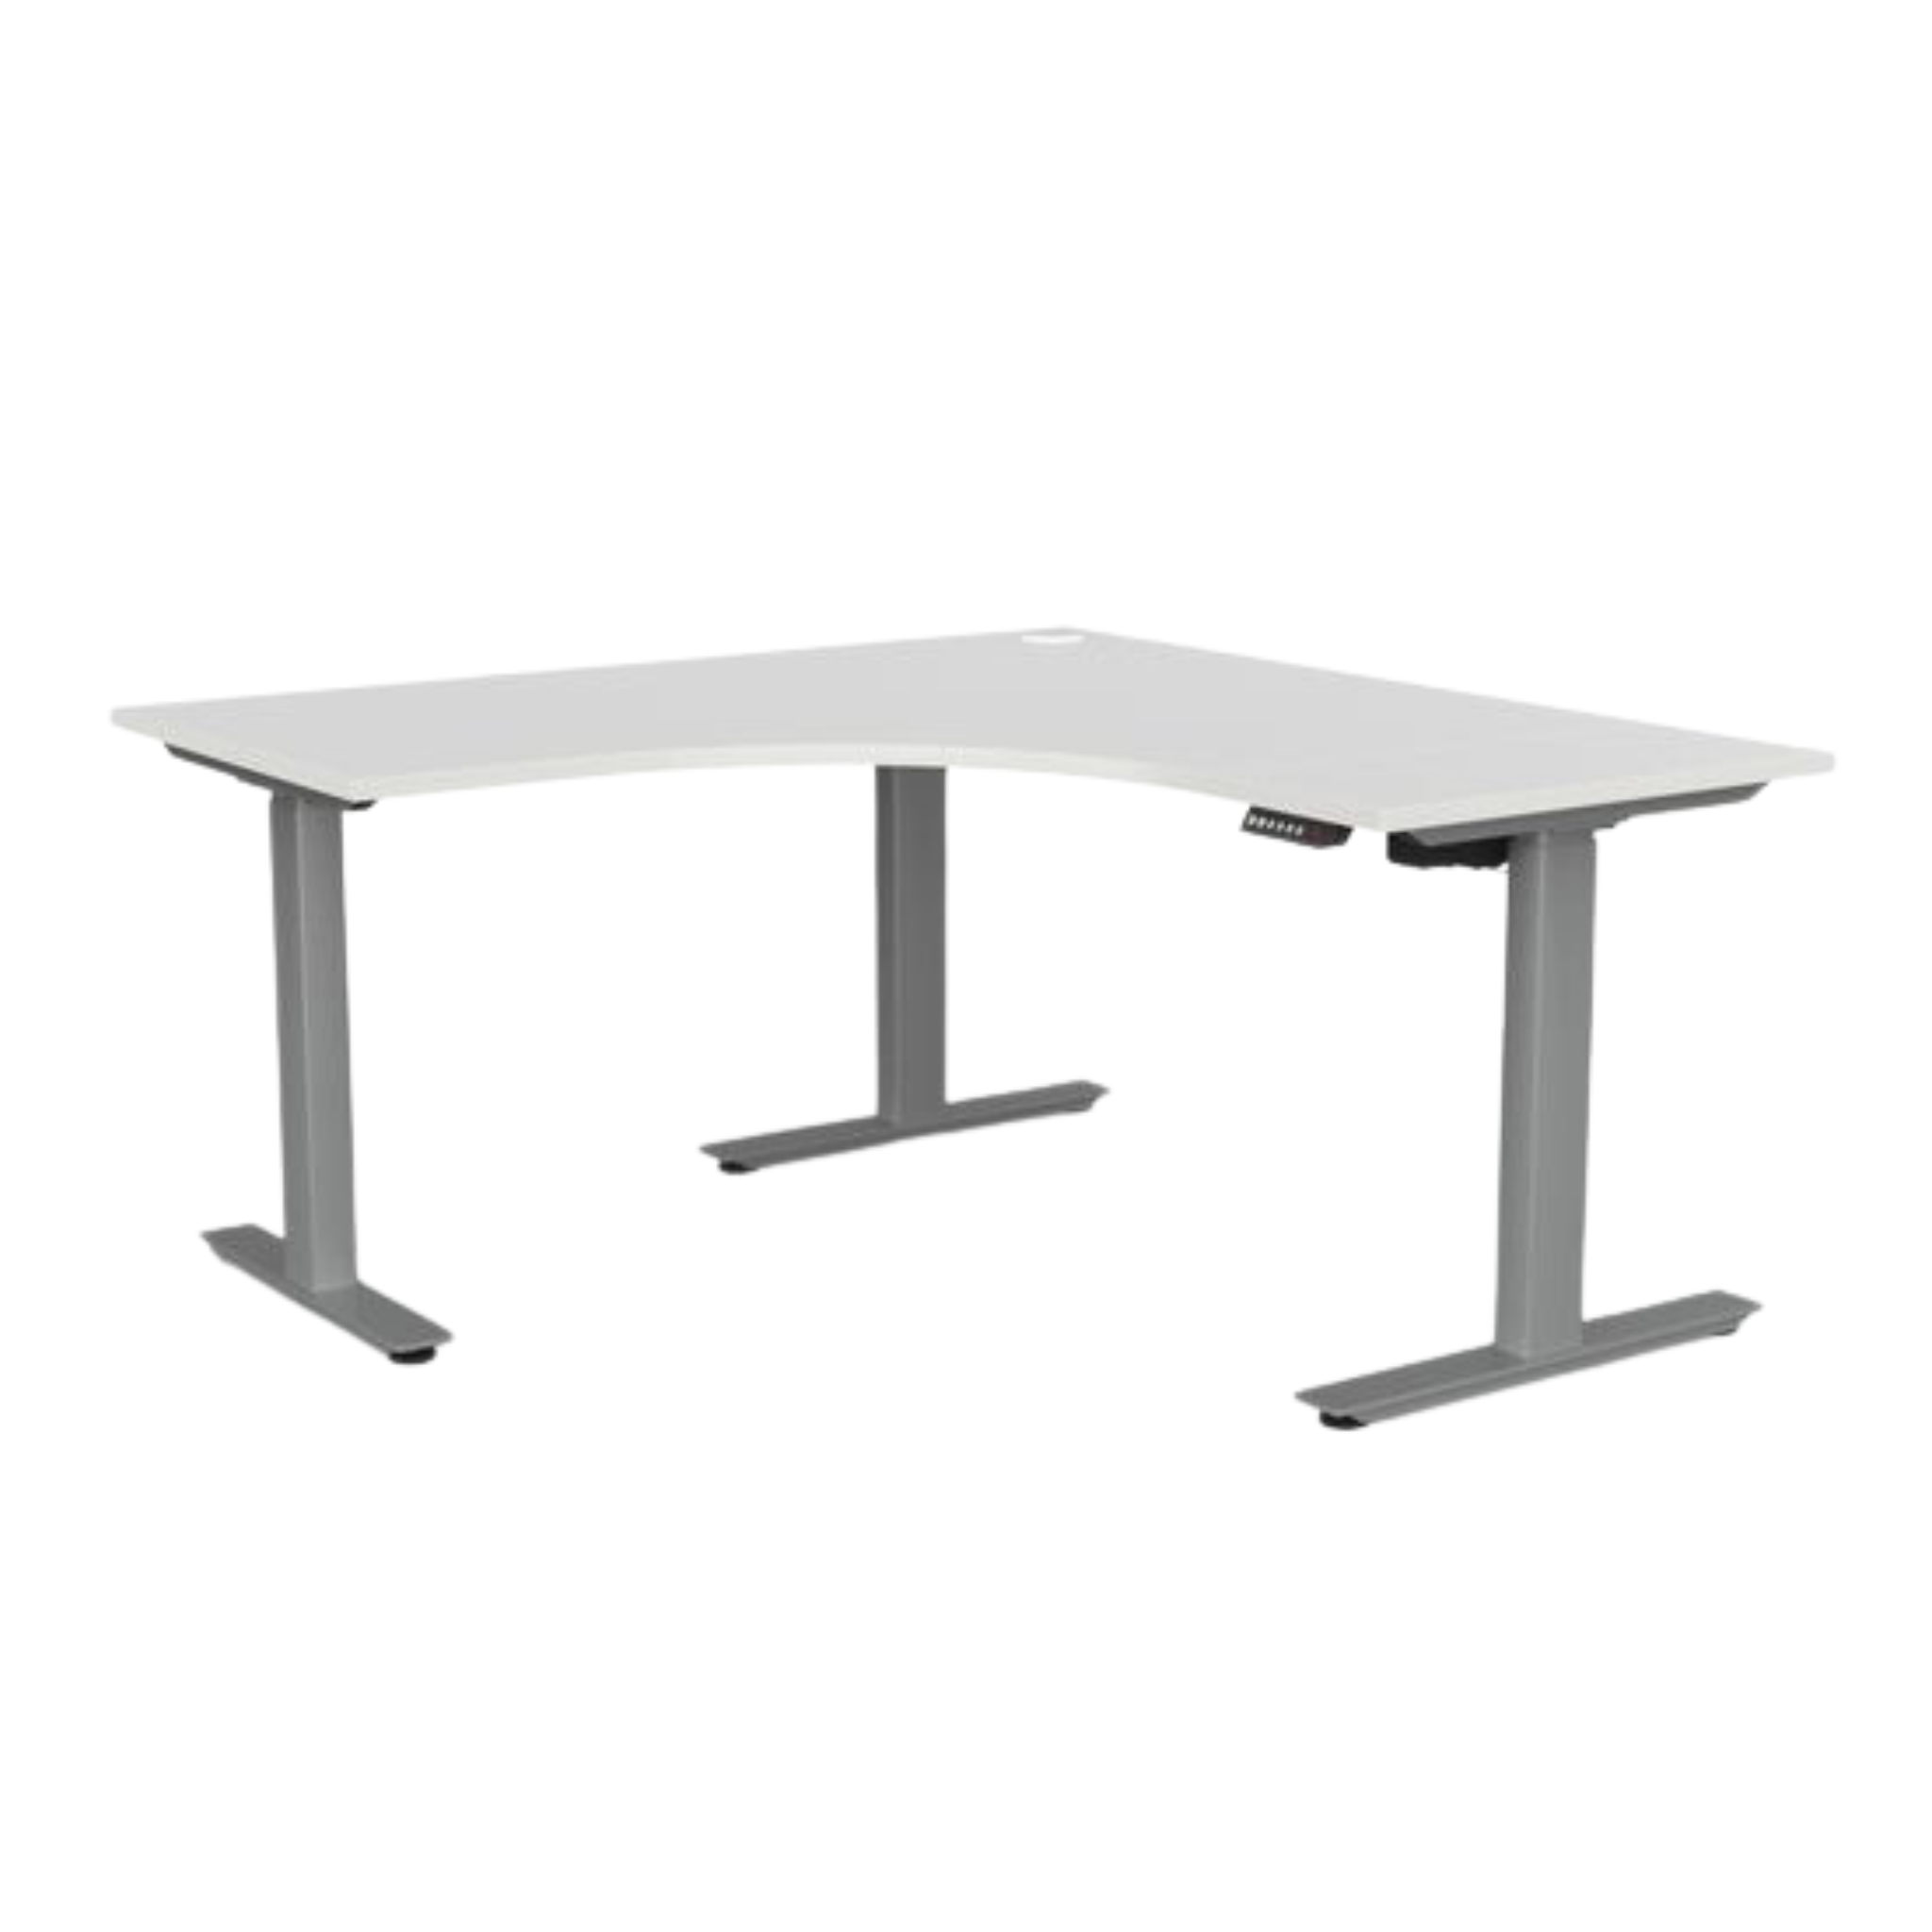 Agile 2 corner workstation with silver frame and white top